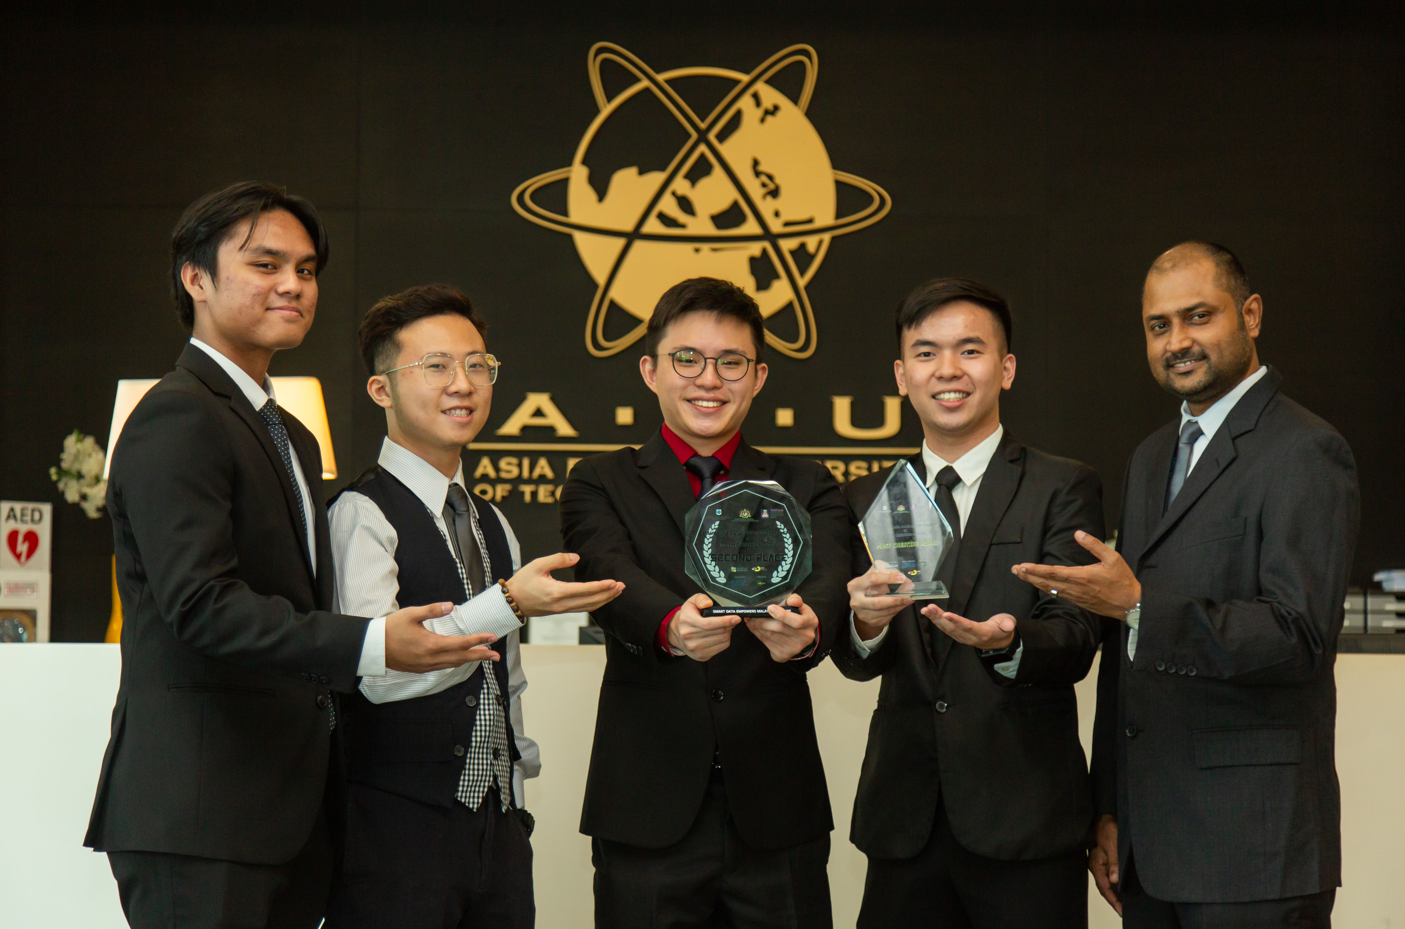 A group of men in suits holding a trophy

Description automatically generated